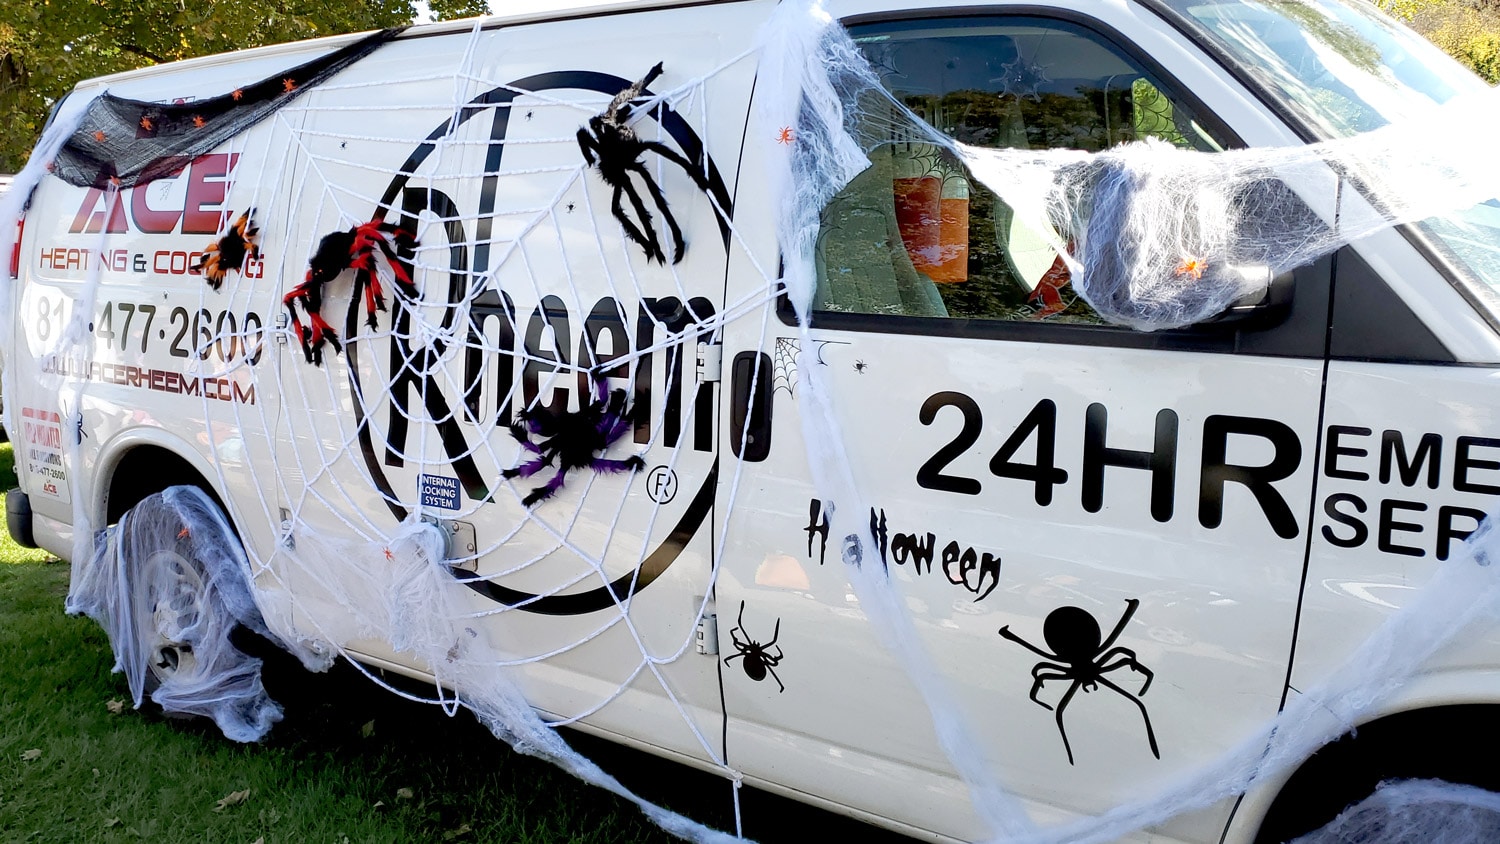 Ace Heating and Cooling van with Halloween decorations.